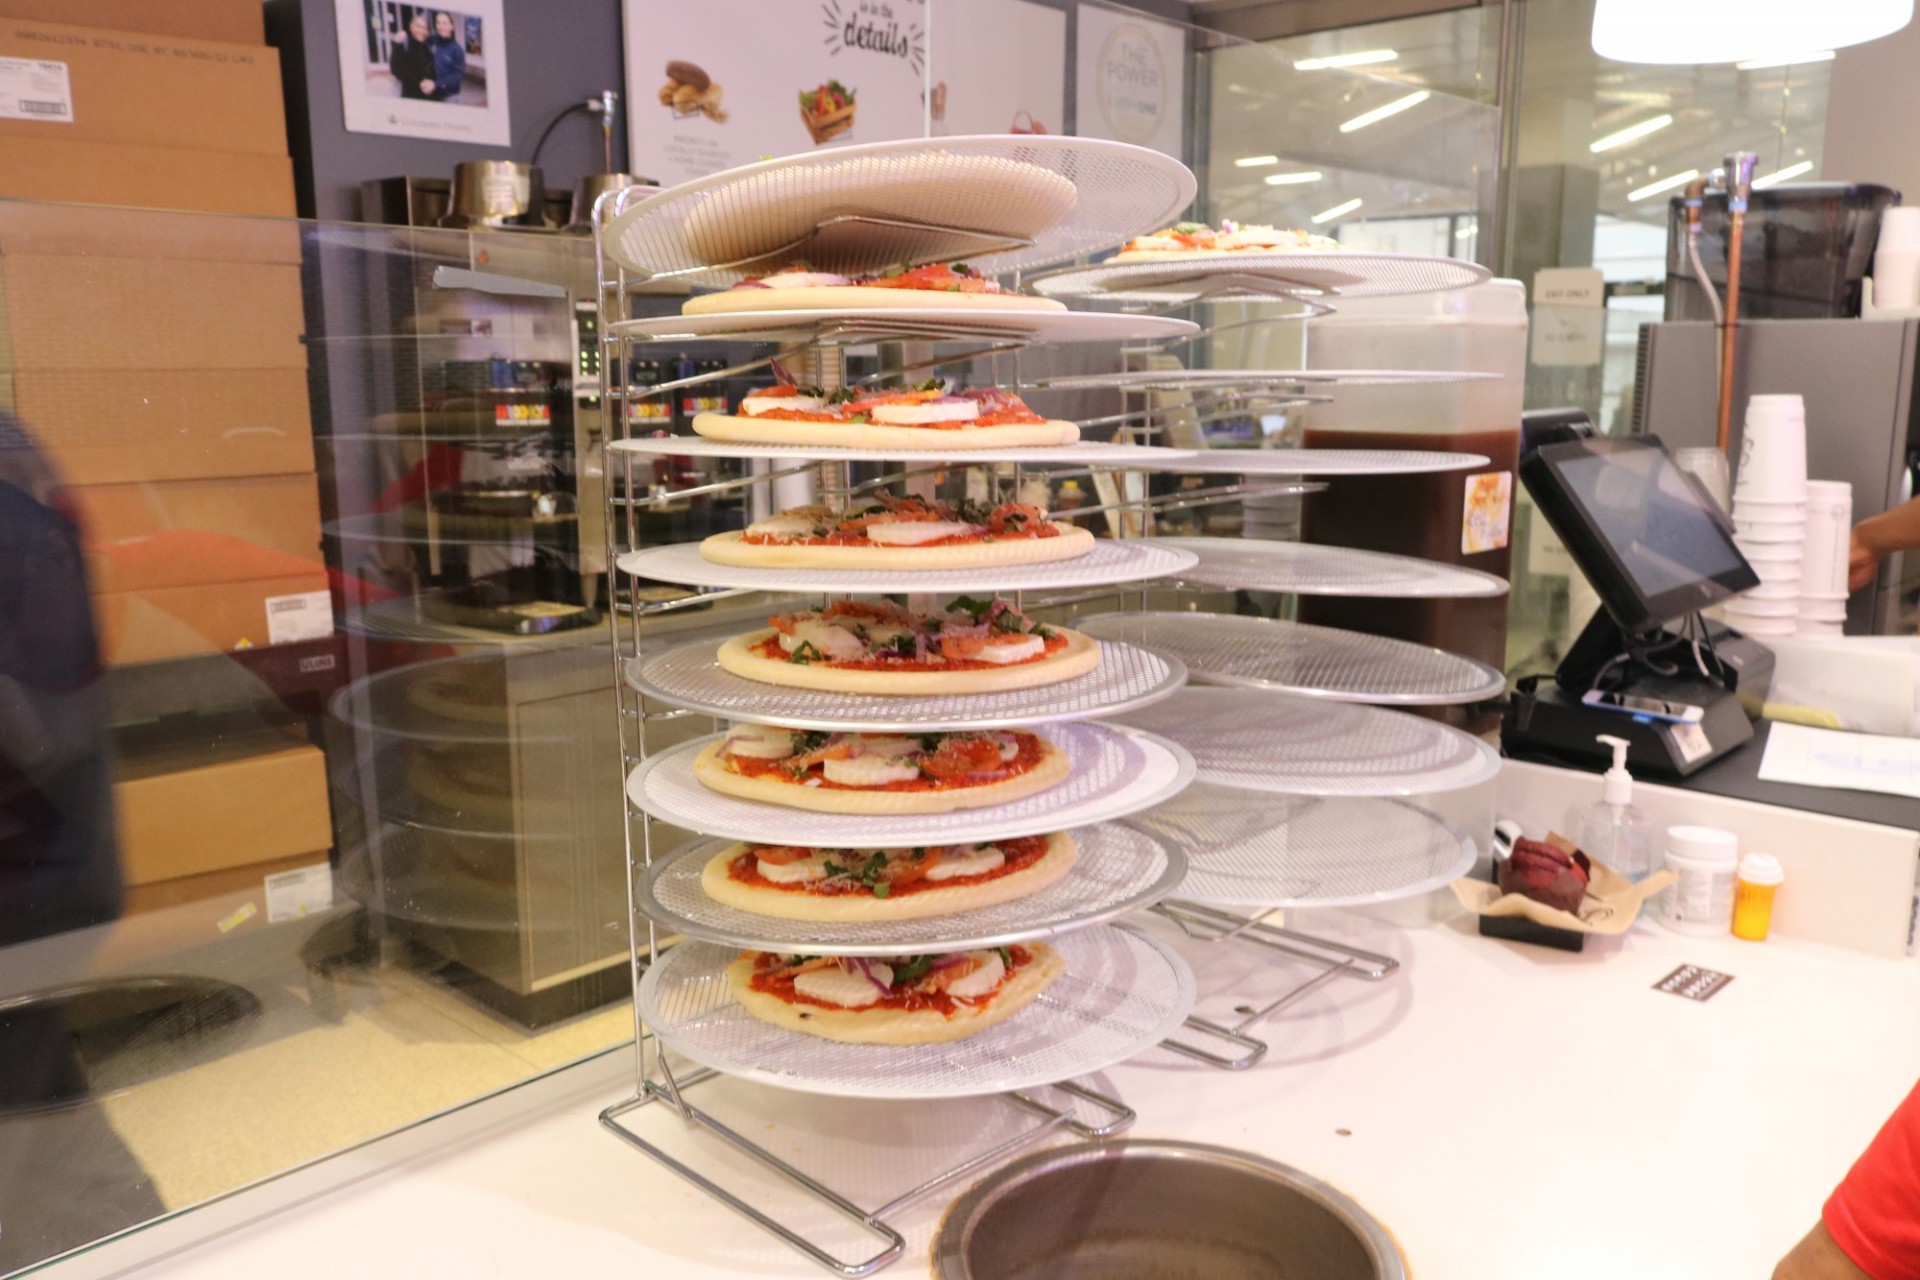 Pizzas on display at the counter